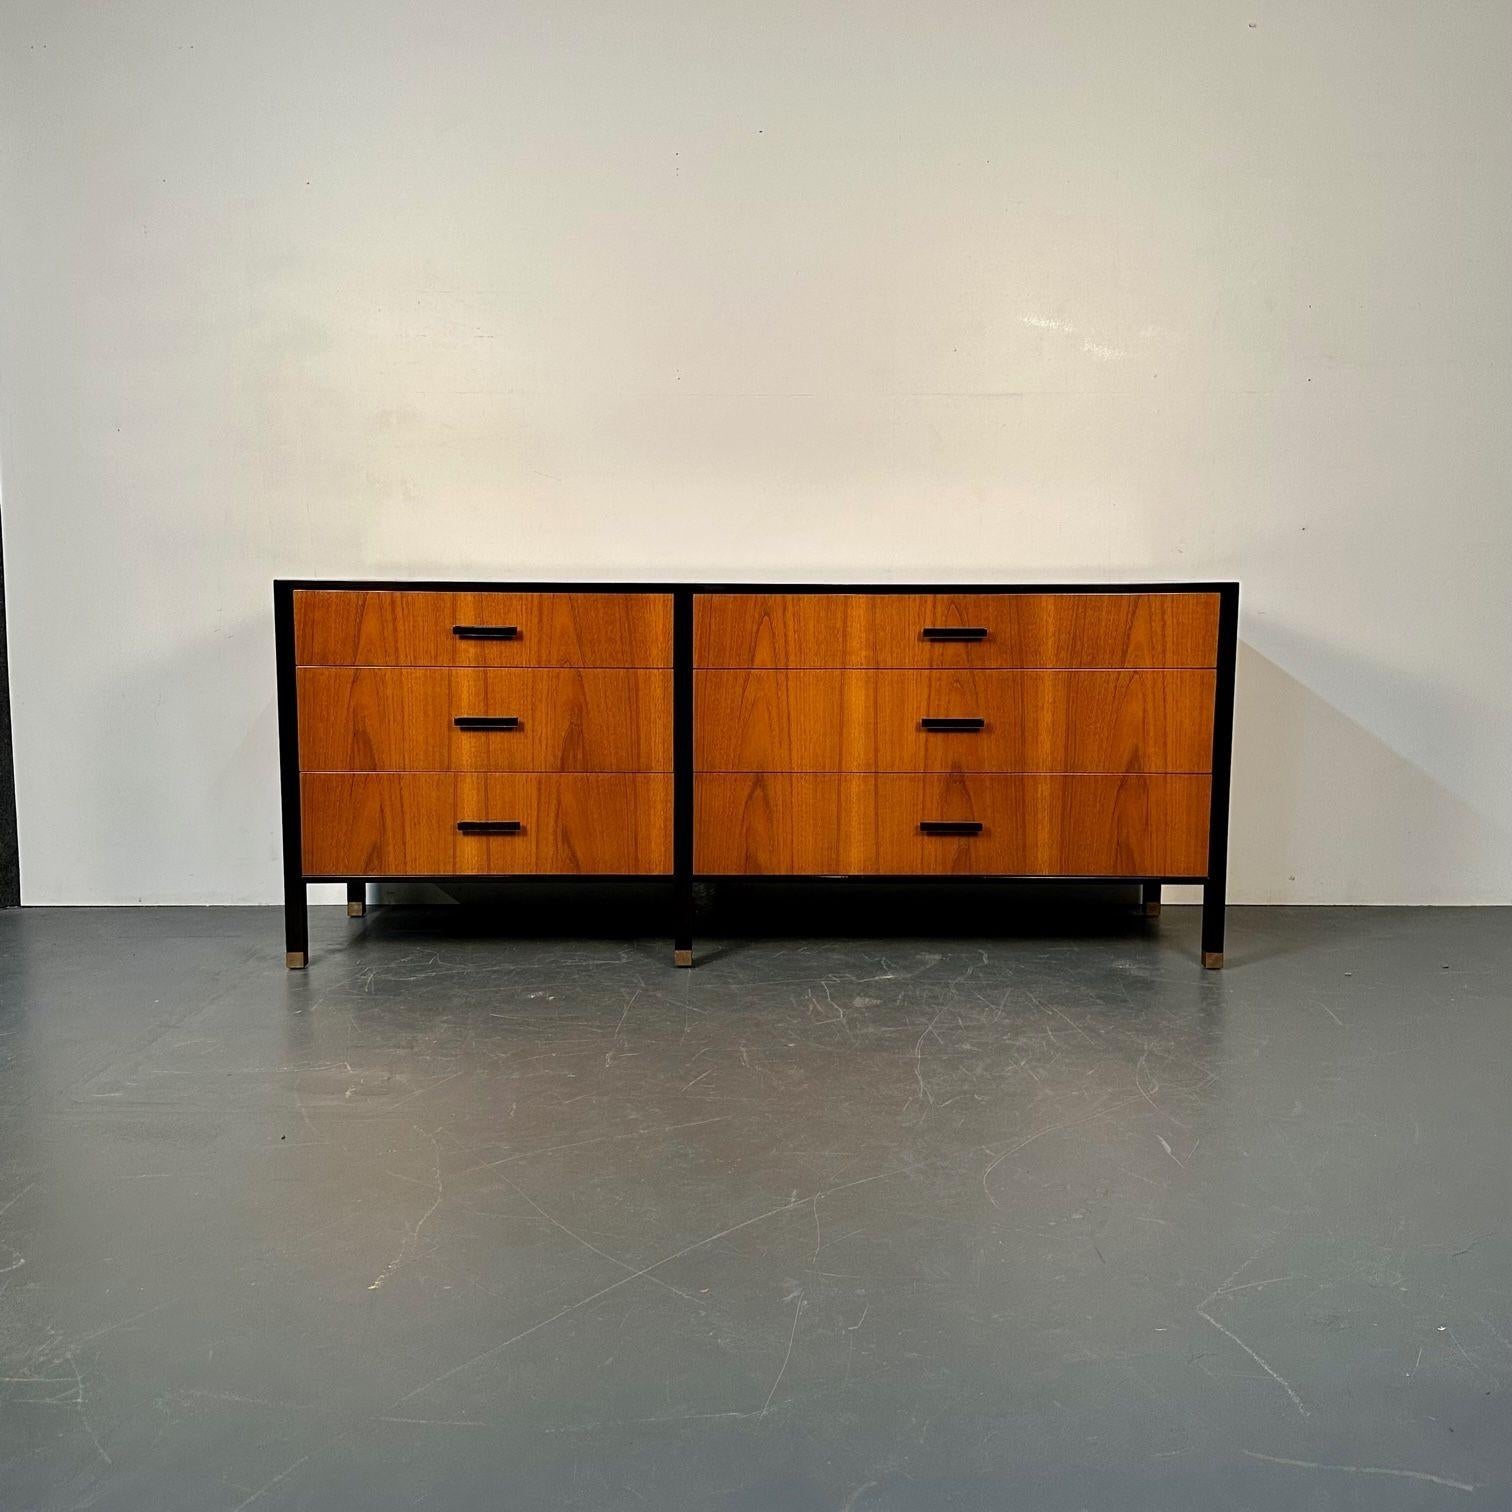 Mid-20th Century American Mid-Century Modern Rosewood Dresser / Sideboard by Harvey Probber 1960s For Sale